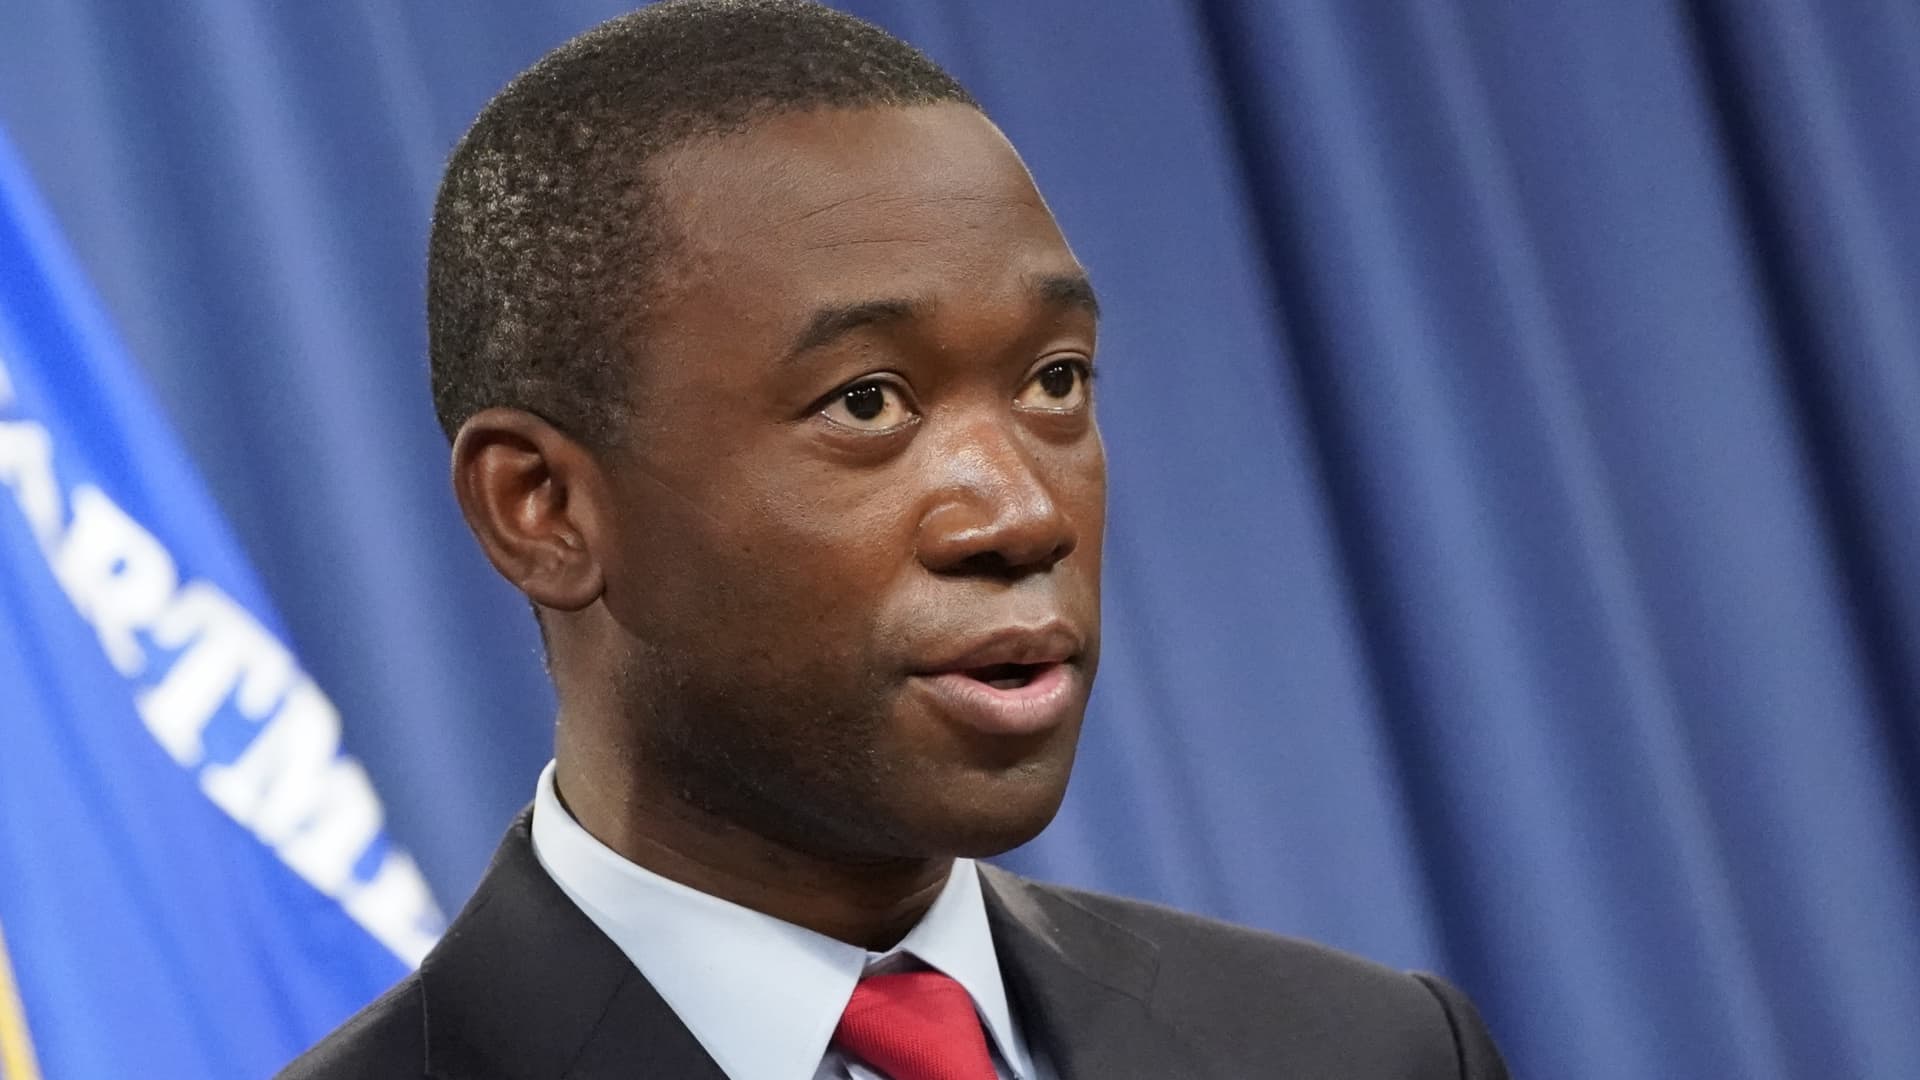 Wally Adeyemo, deputy U.S. Treasury secretary, speaks during a news conference at the Department of Justice in Washington, D.C., U.S., on Monday, Nov. 8, 2021.